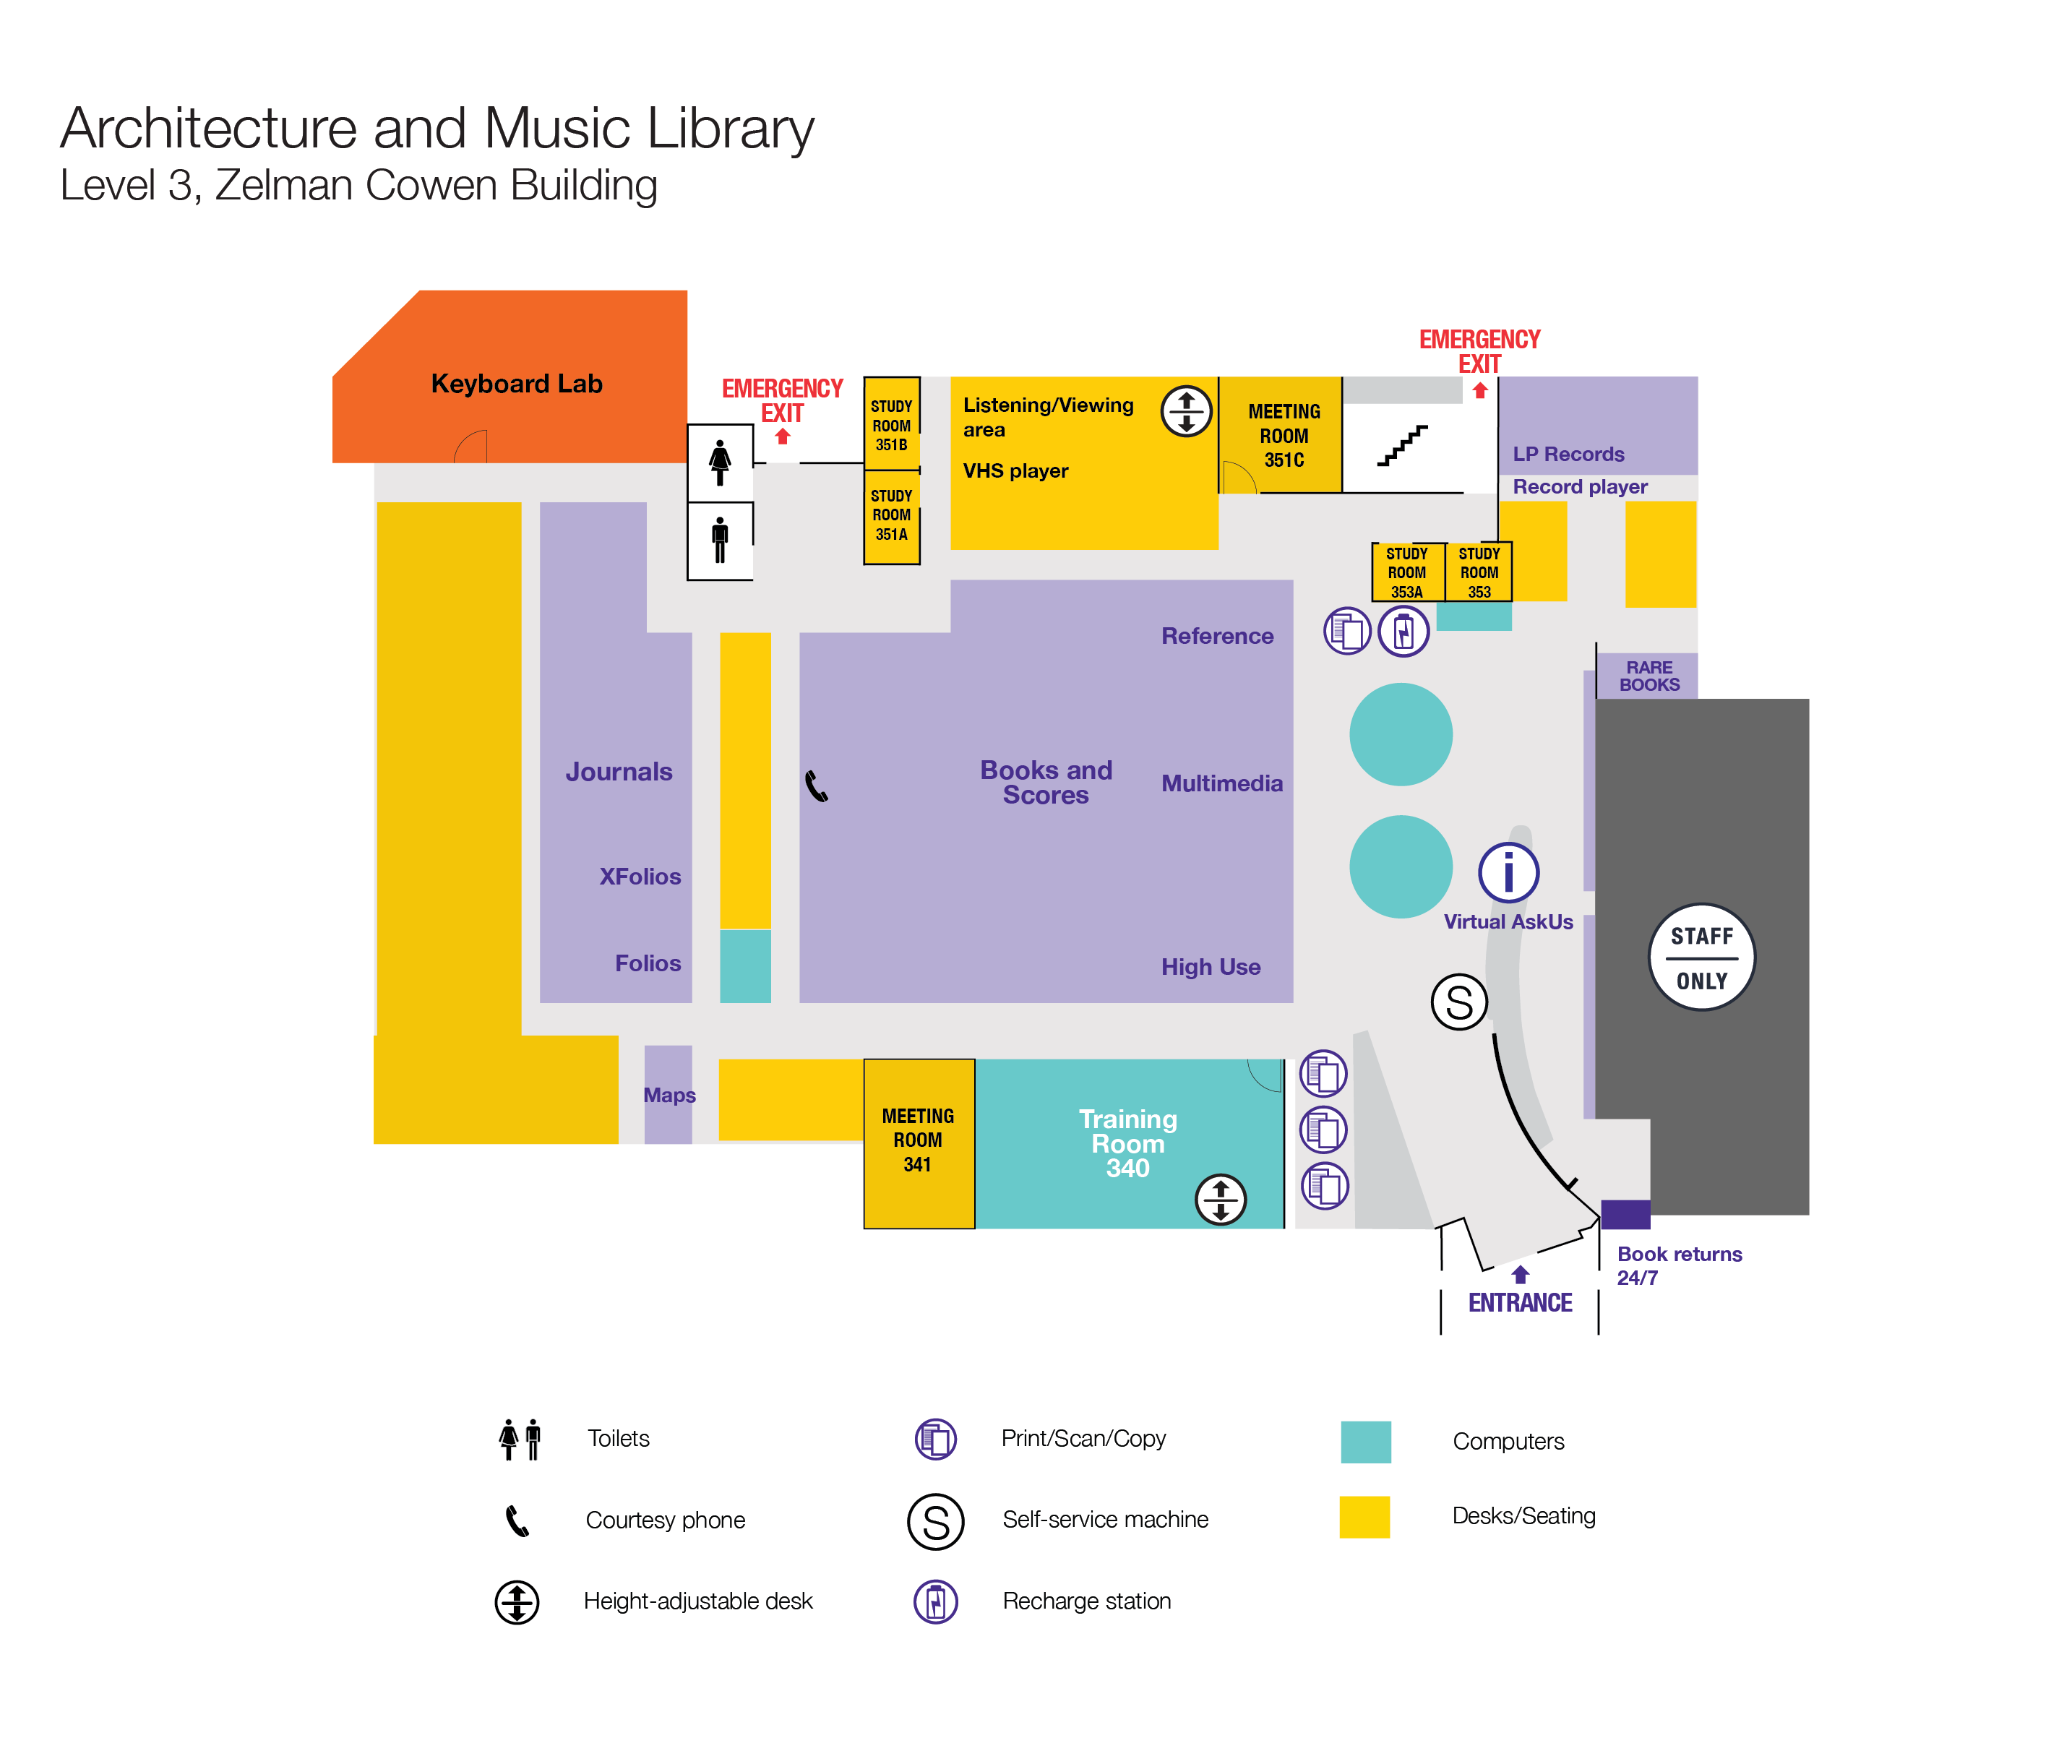 Architecture and Music Library floor plan